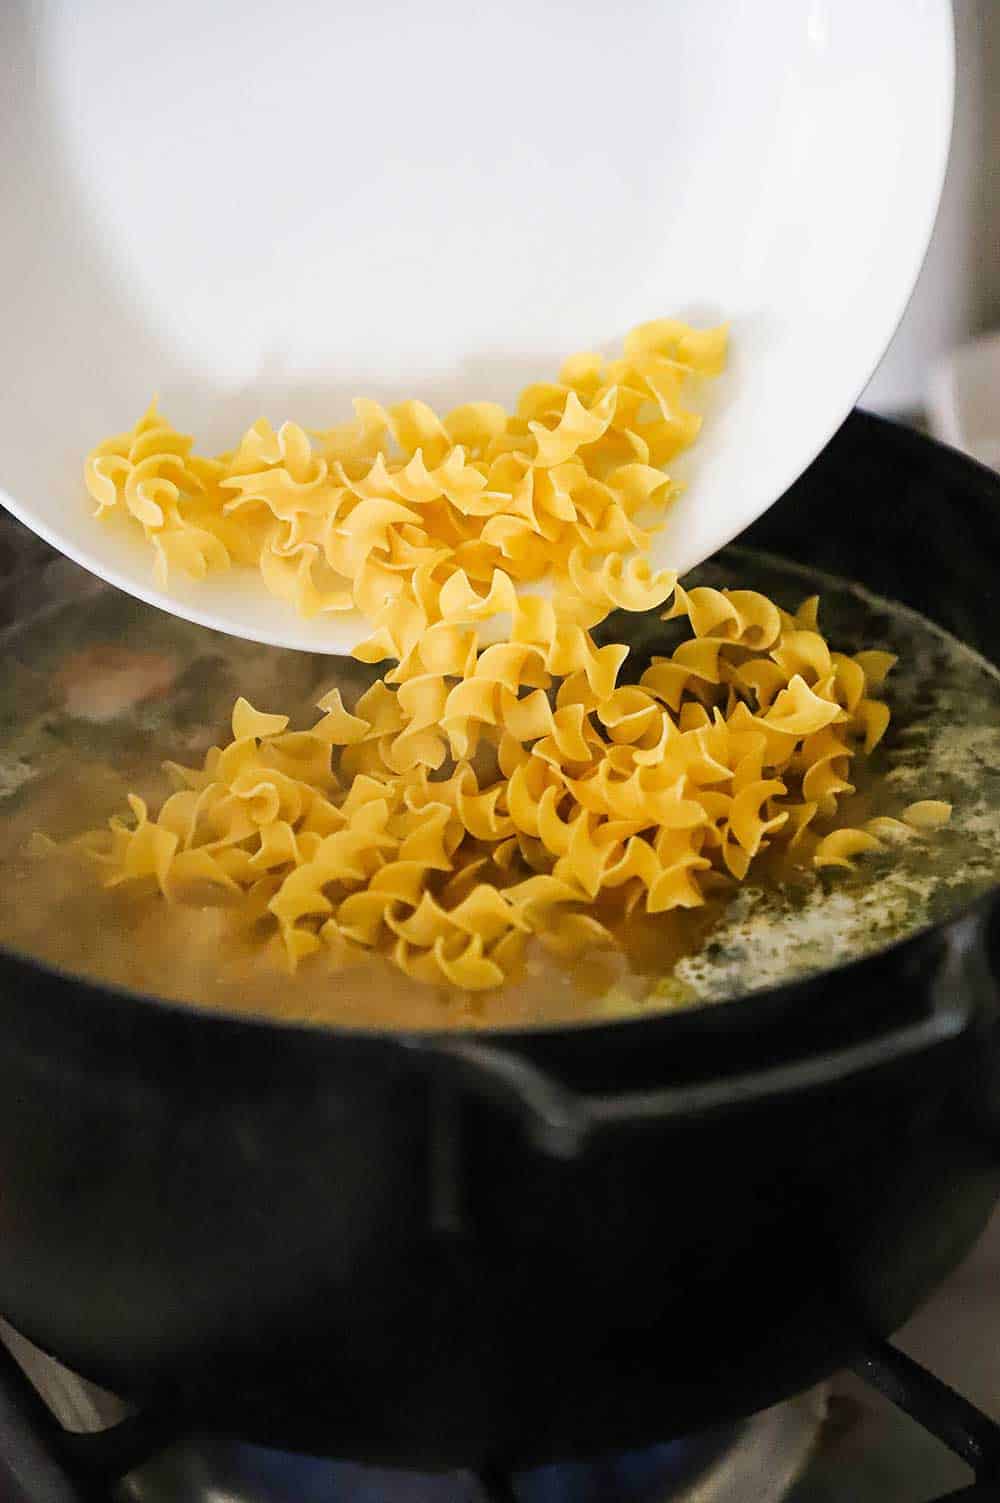 Uncooked pasta egg noodles being transferred from a white bowl into a black pot filled with simmering broth and cooked vegetables. 